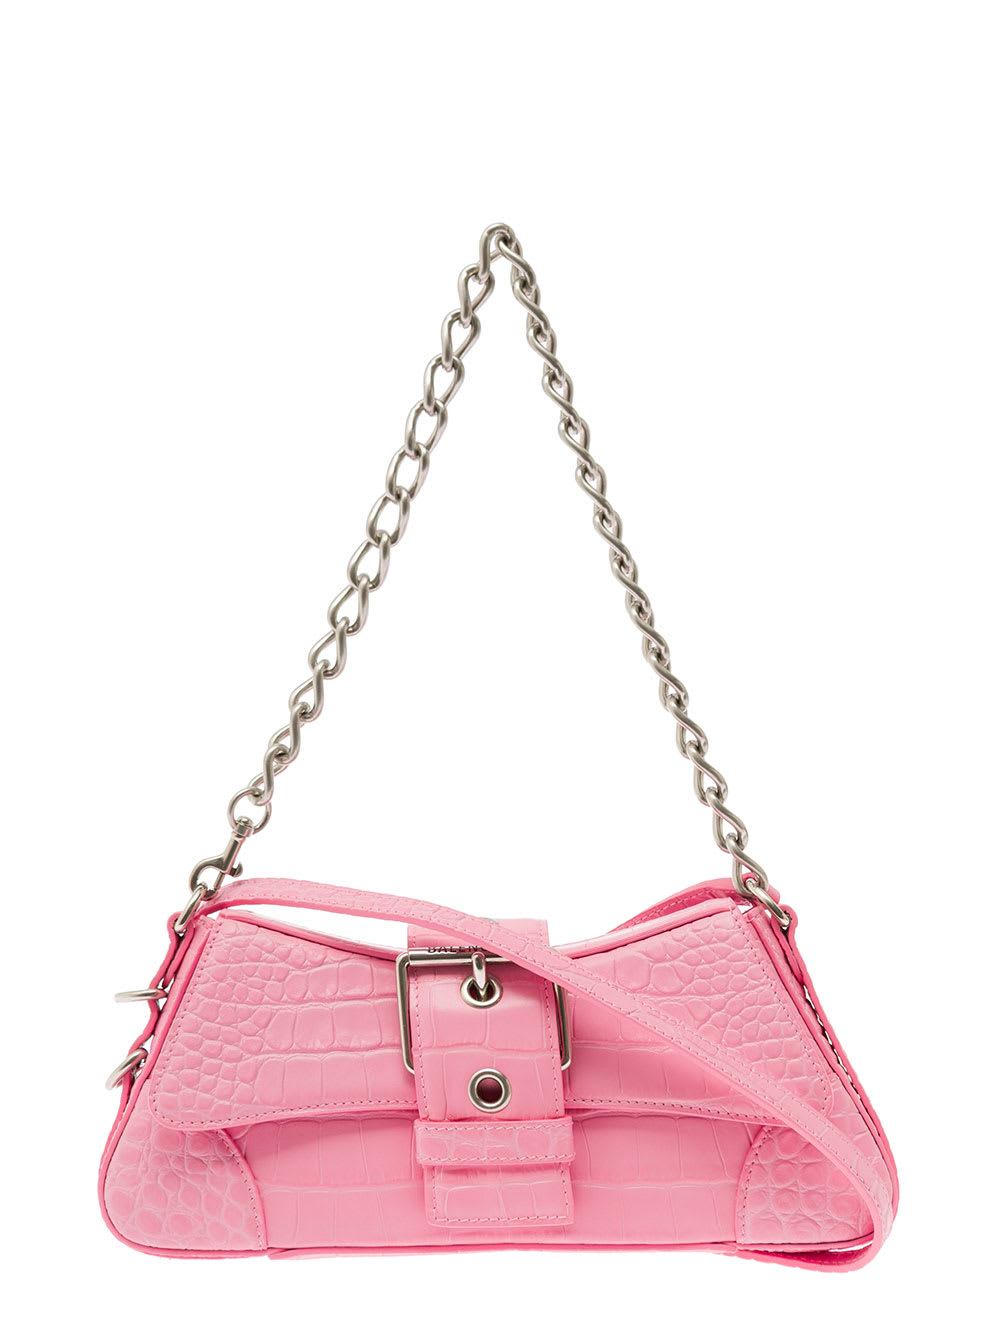 Balenciaga Lindsay Pink Small Shoulder Bag With Strap In Matte Crocodile Embossed Leather Wth Aged-silver Hardware Woman